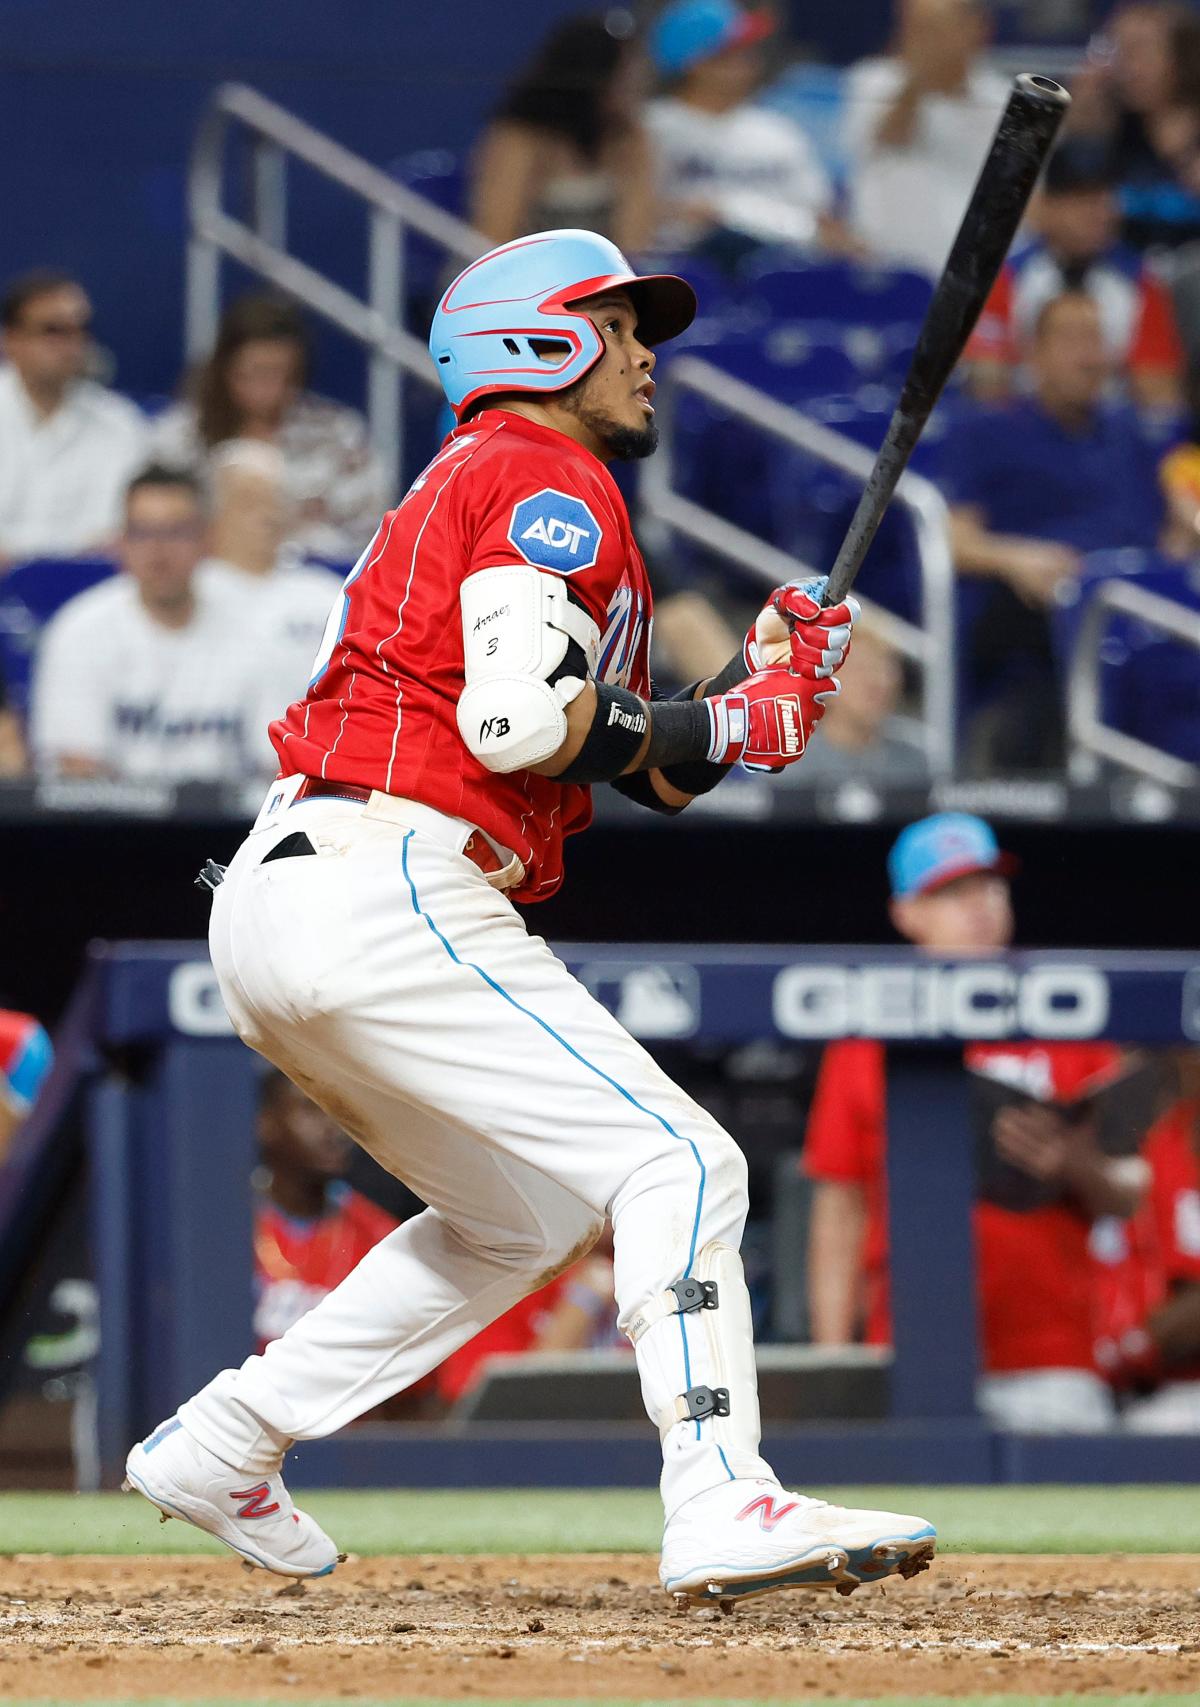 Son of former major leaguer is hitting .400 in the minors